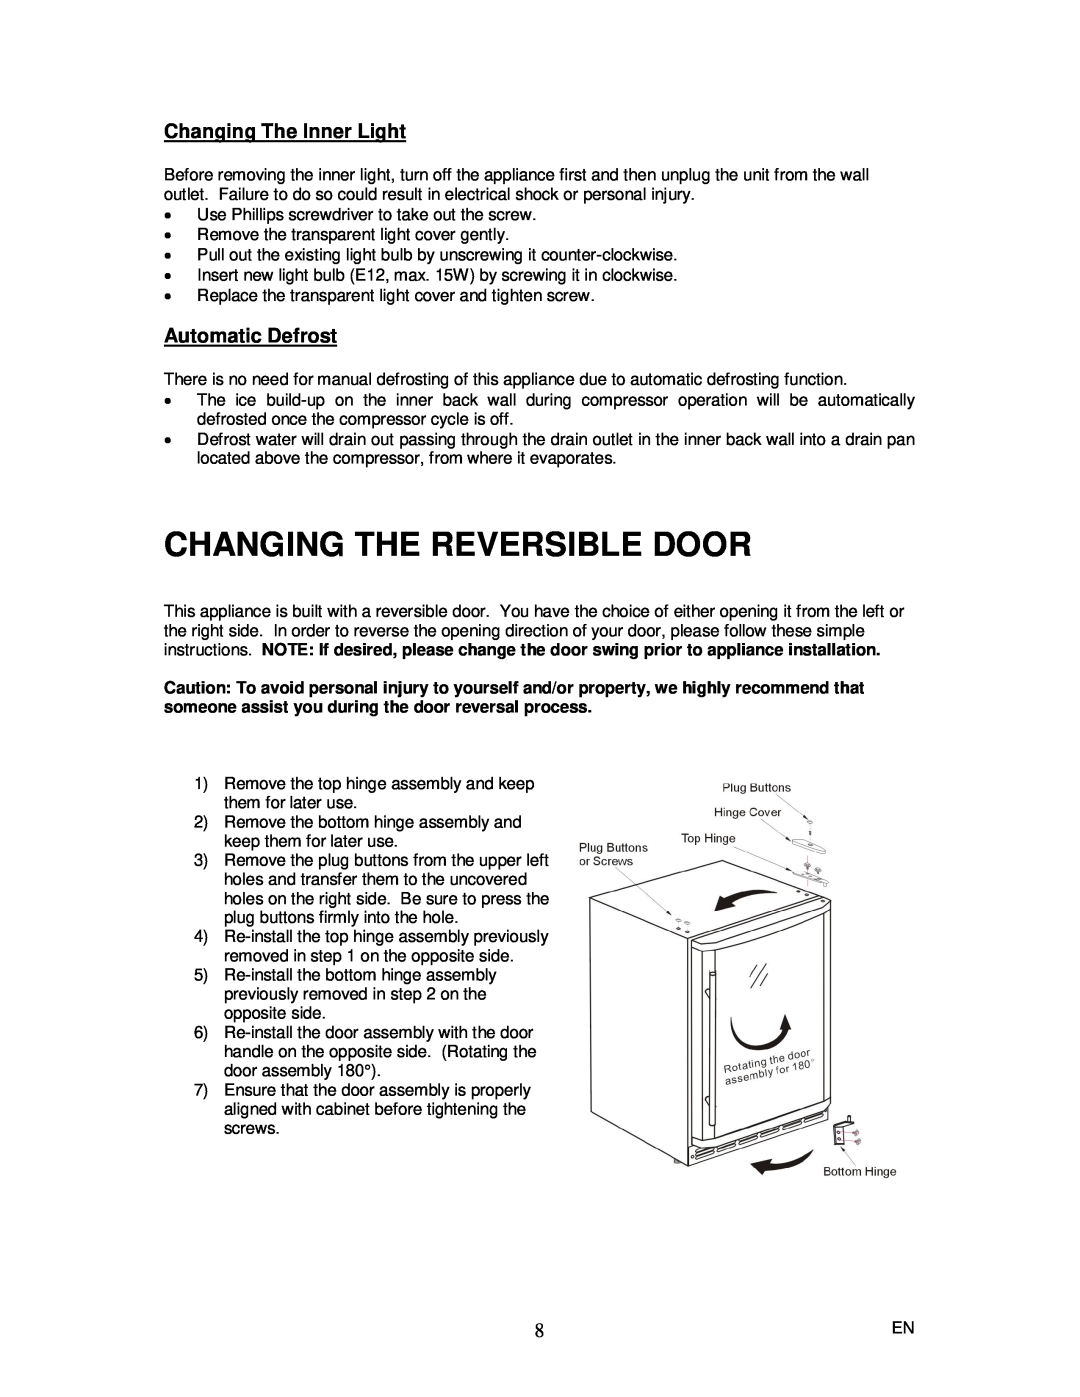 Magic Chef MCBC58DSTF instruction manual Changing The Reversible Door, Changing The Inner Light, Automatic Defrost 